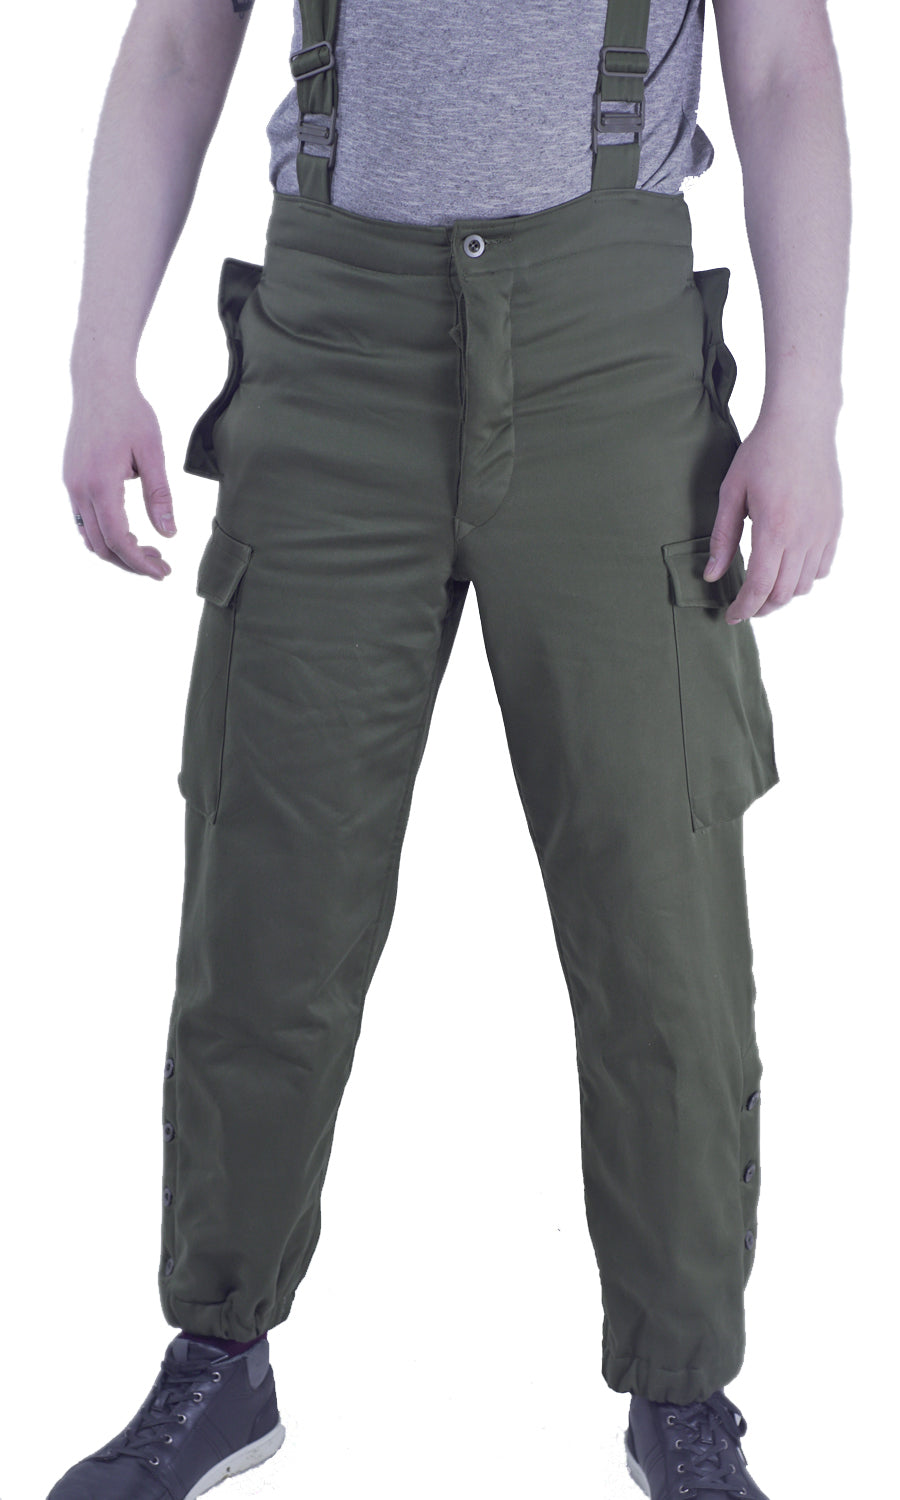 Austrian Army “Cold Weather Trousers”